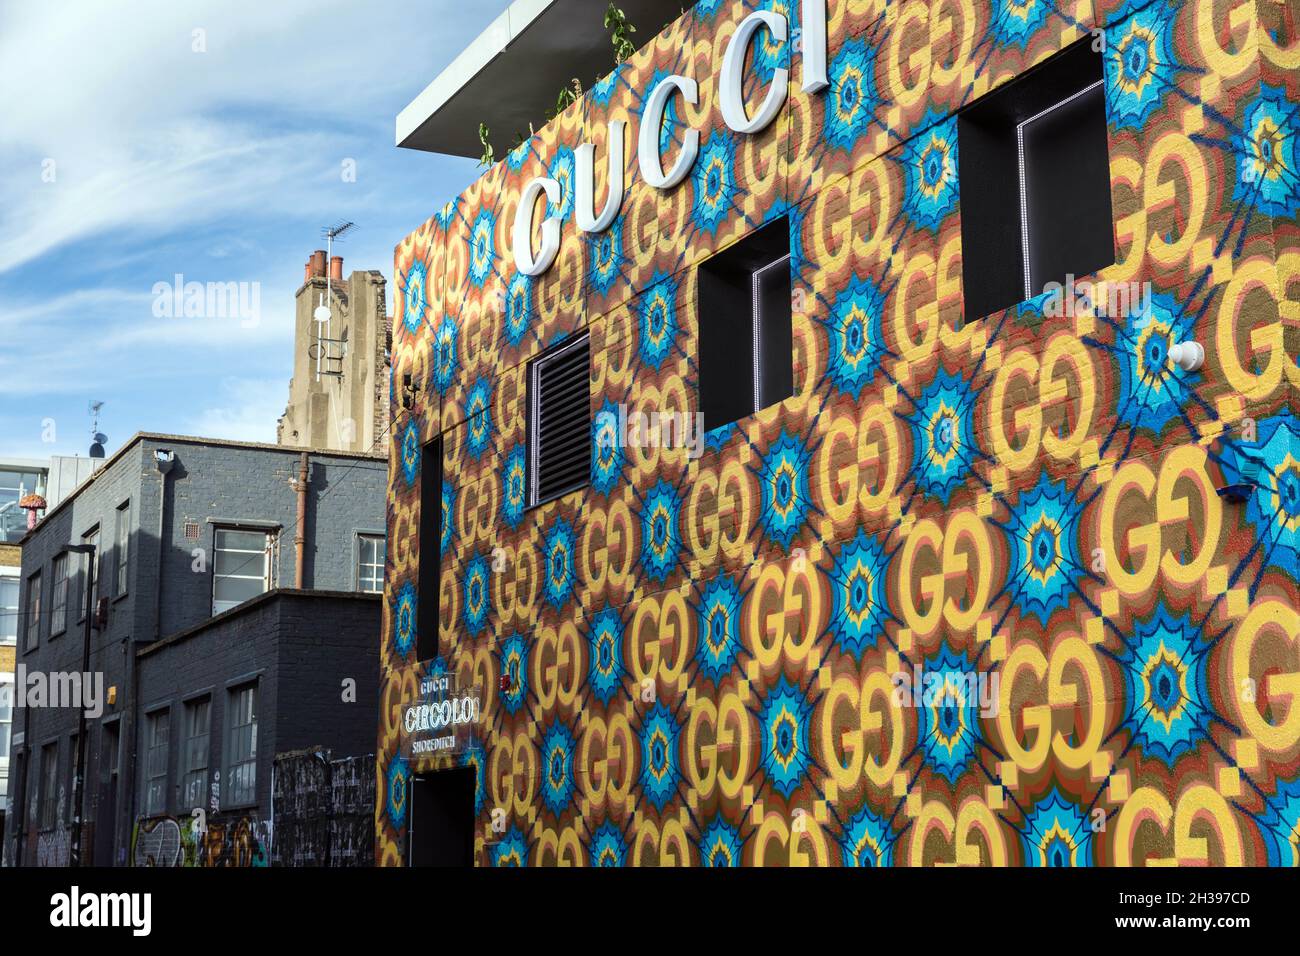 A building in Shoreditch, east London. Photo: Bob Smith Photography Stock Photo